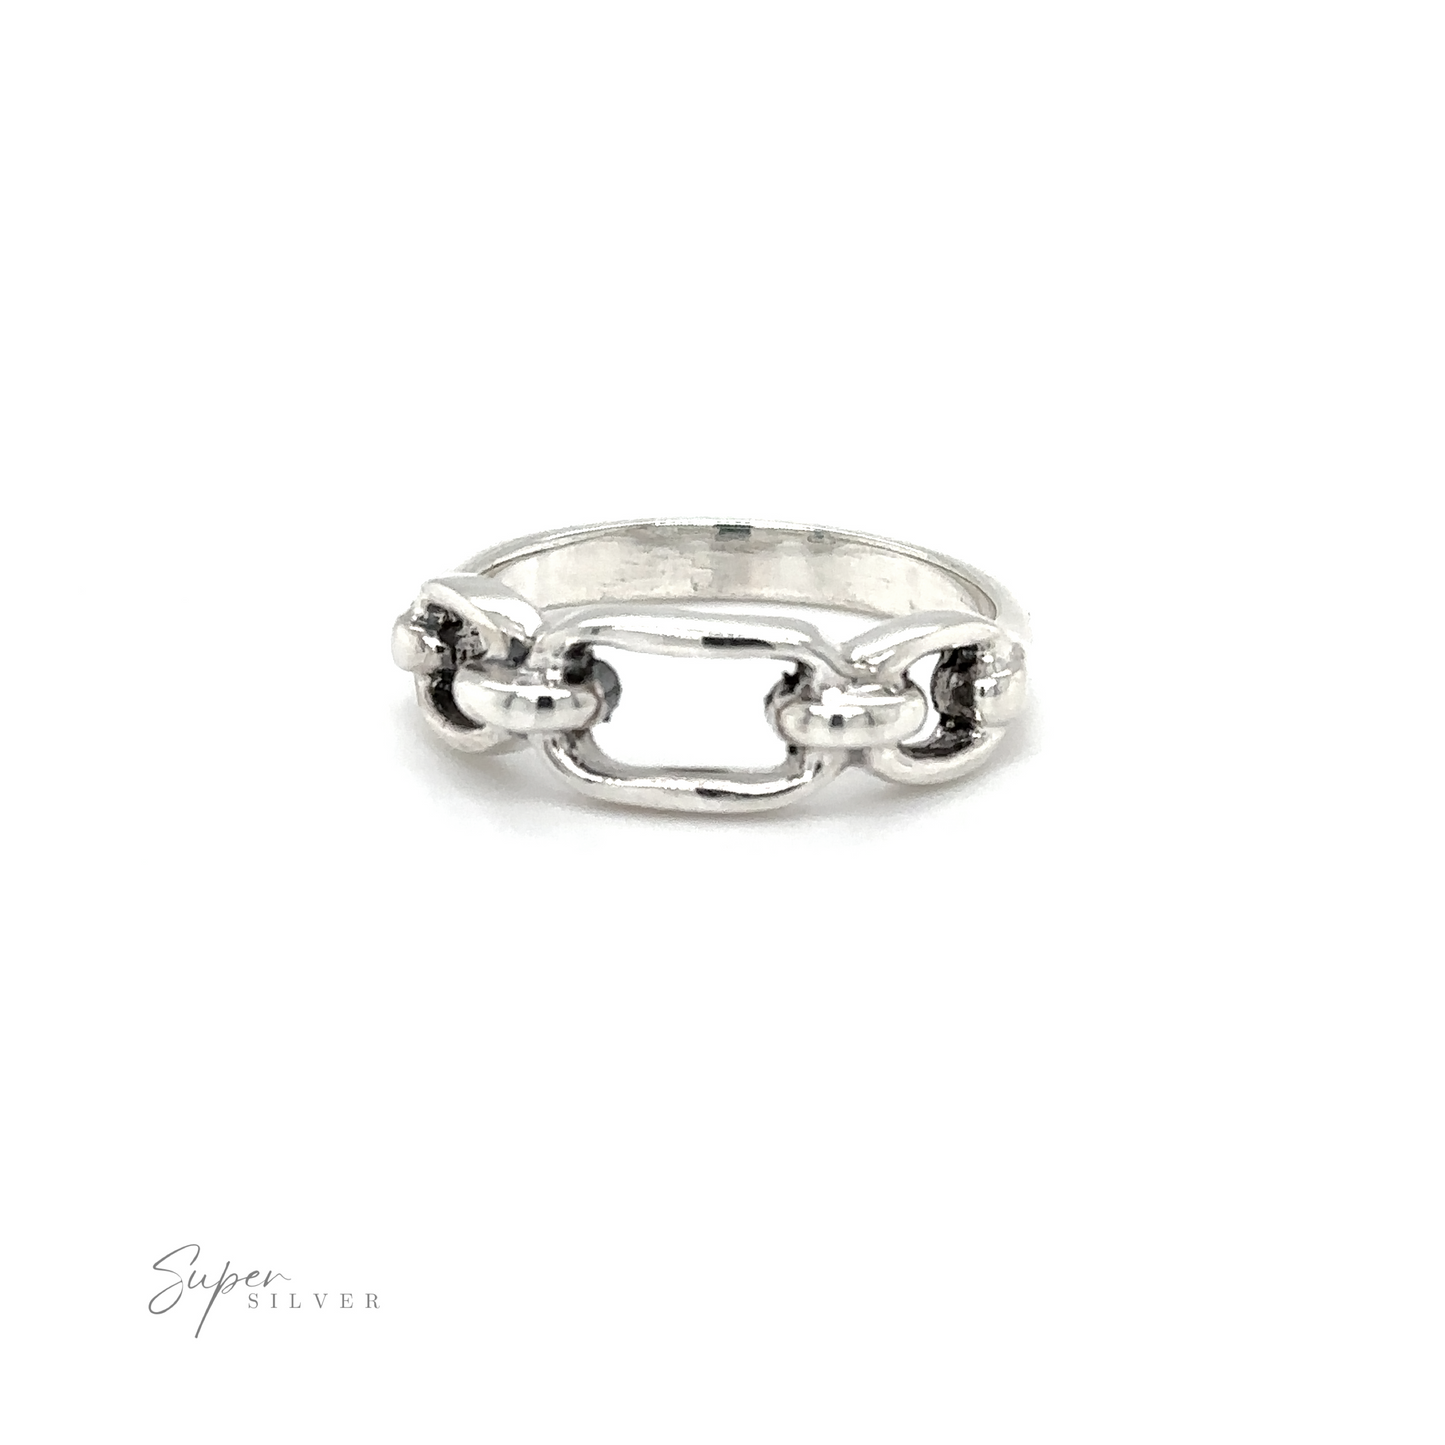 A modern fashion statement, this Thick Chain Link Ring from Super Silver combines versatility with a silver chain-like design.